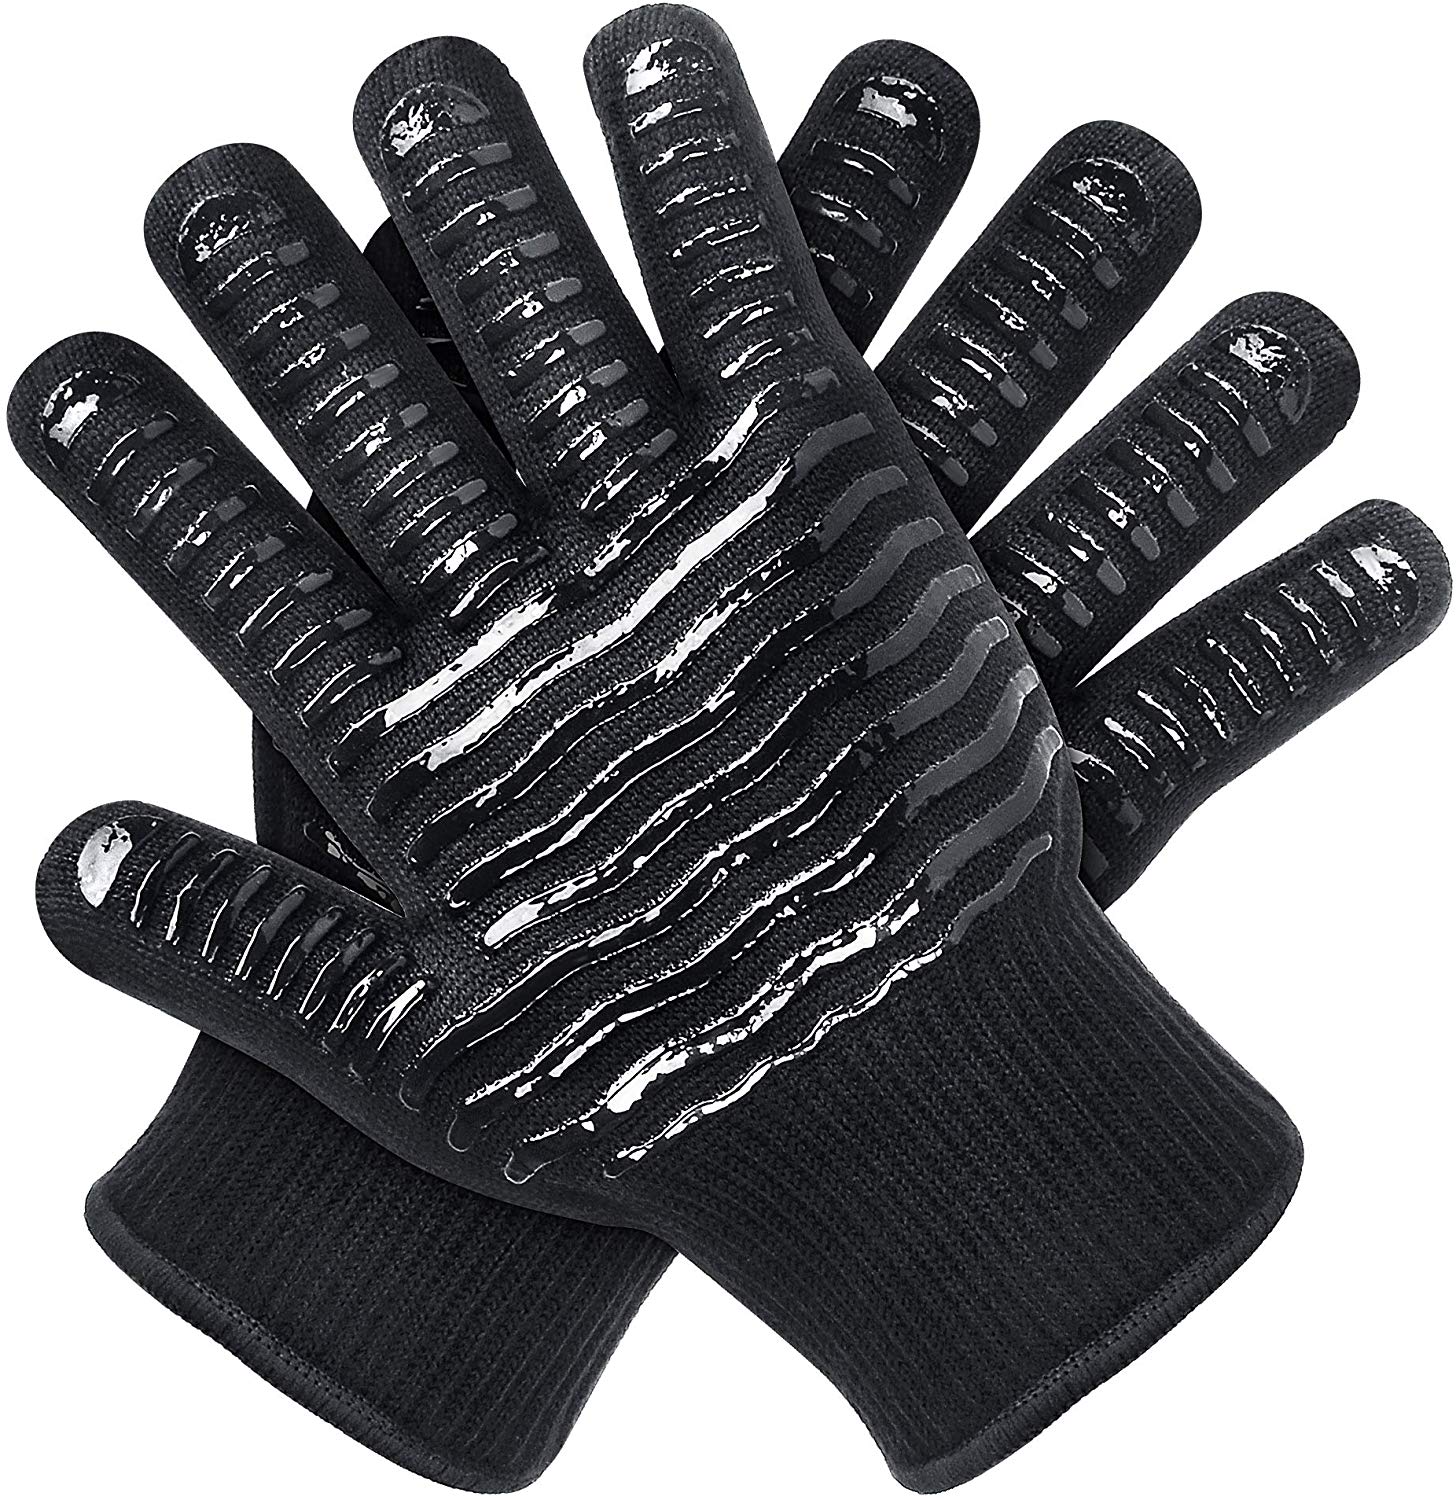 OUUO Certified Lightweight & Flexible Oven Mitts